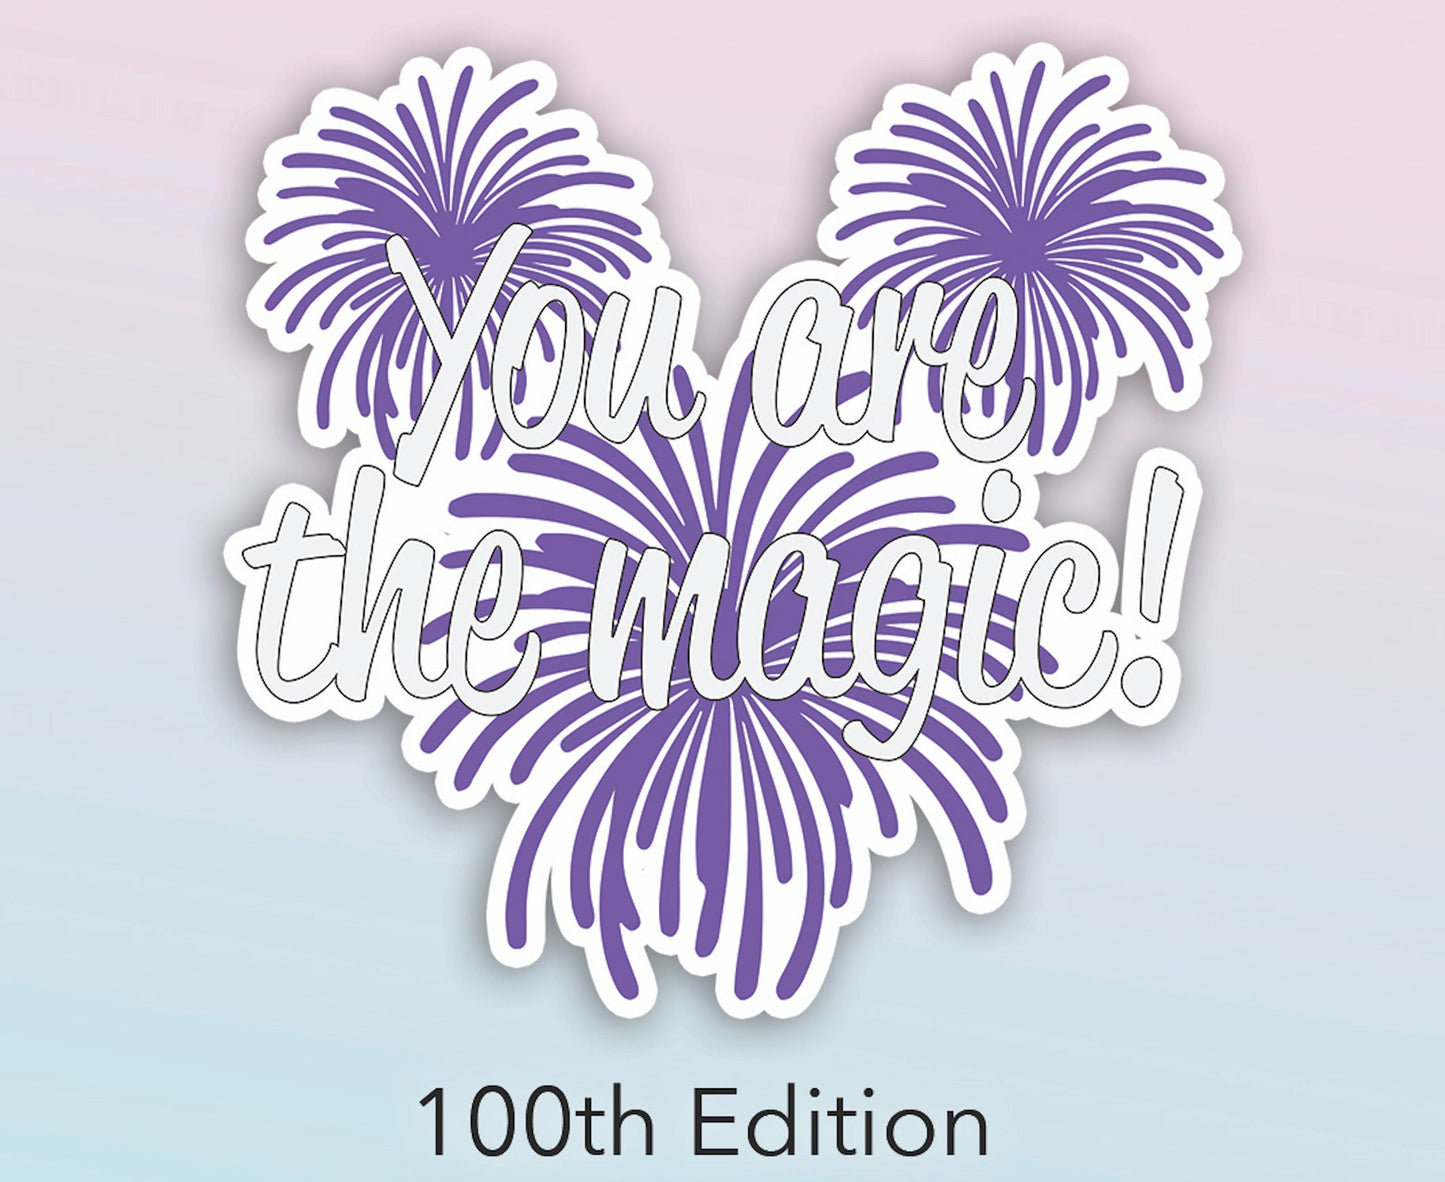 You are the magic Firework Waterproof Sticker - Individual or Bundle